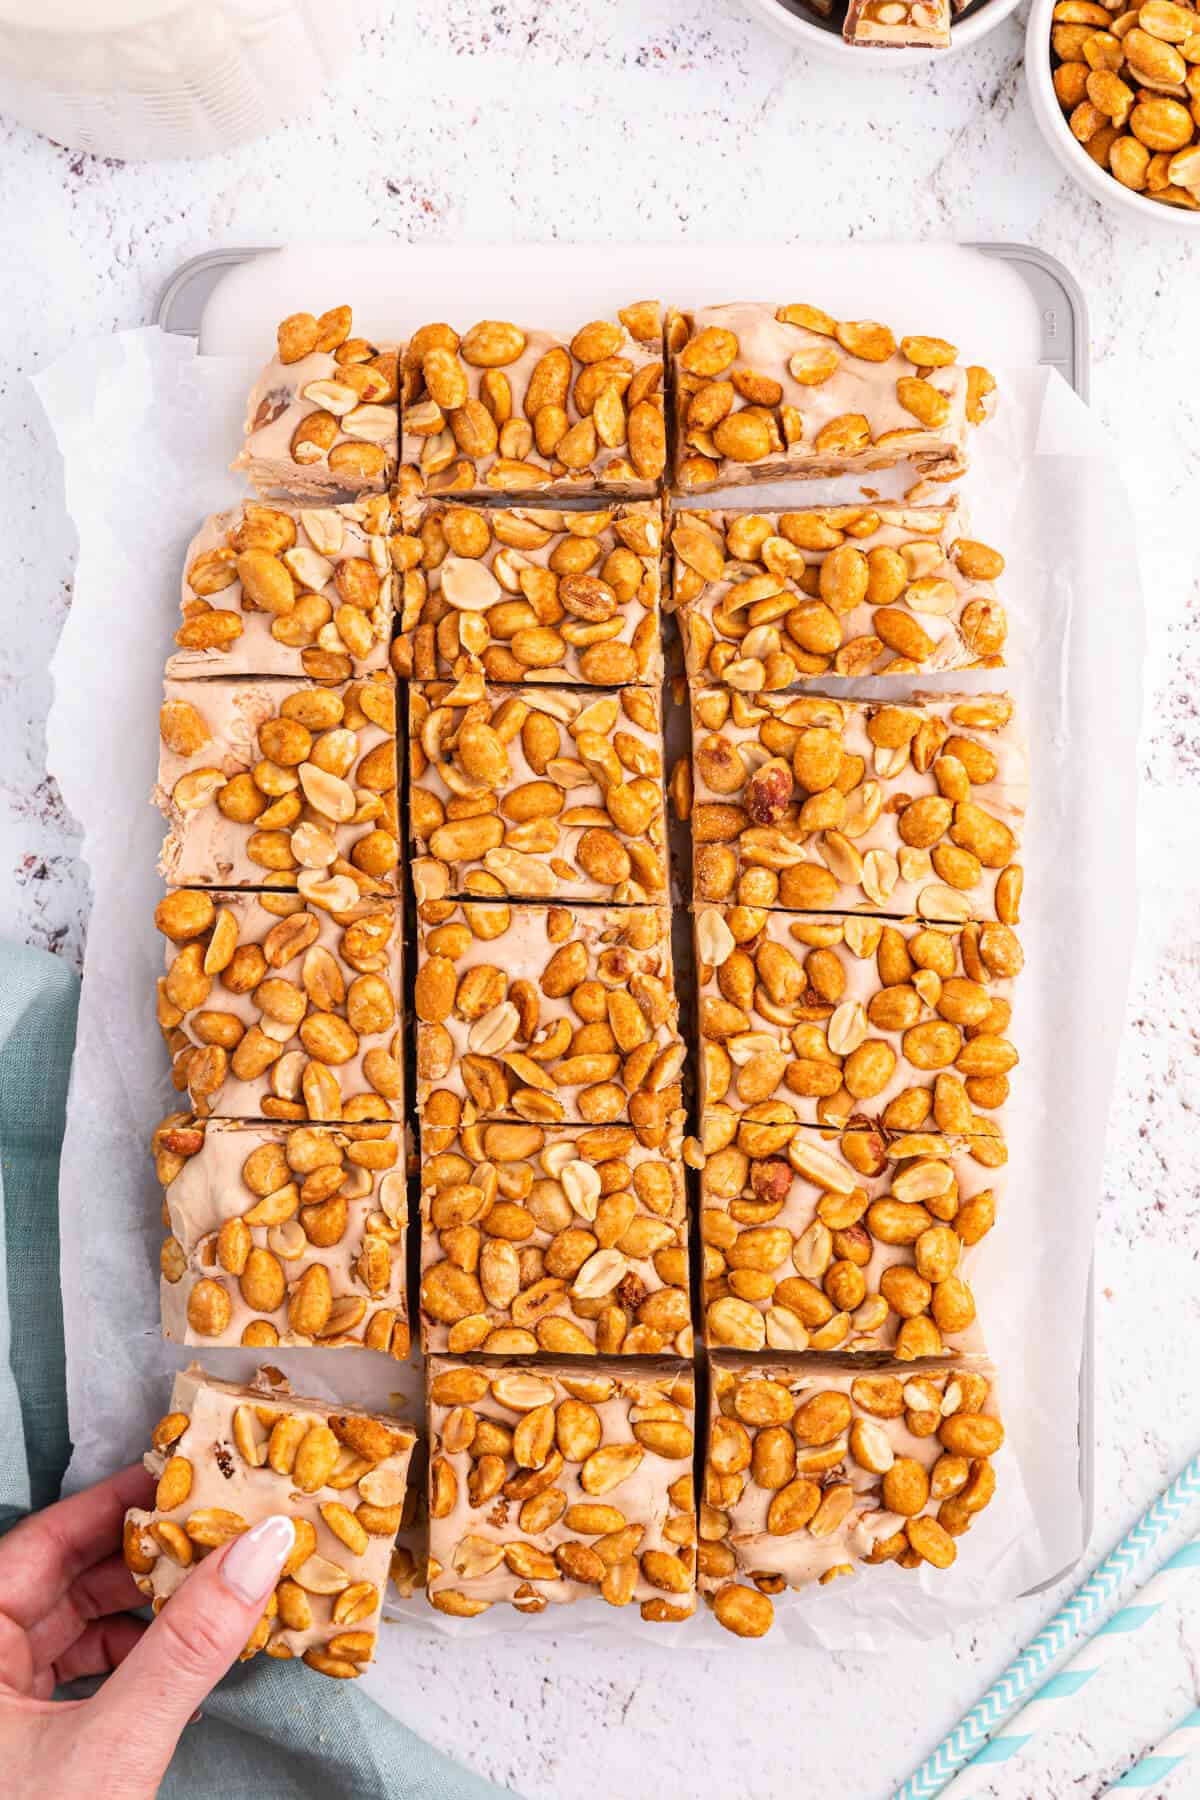 Nougat bars cut into squares with a hand grabbing one.